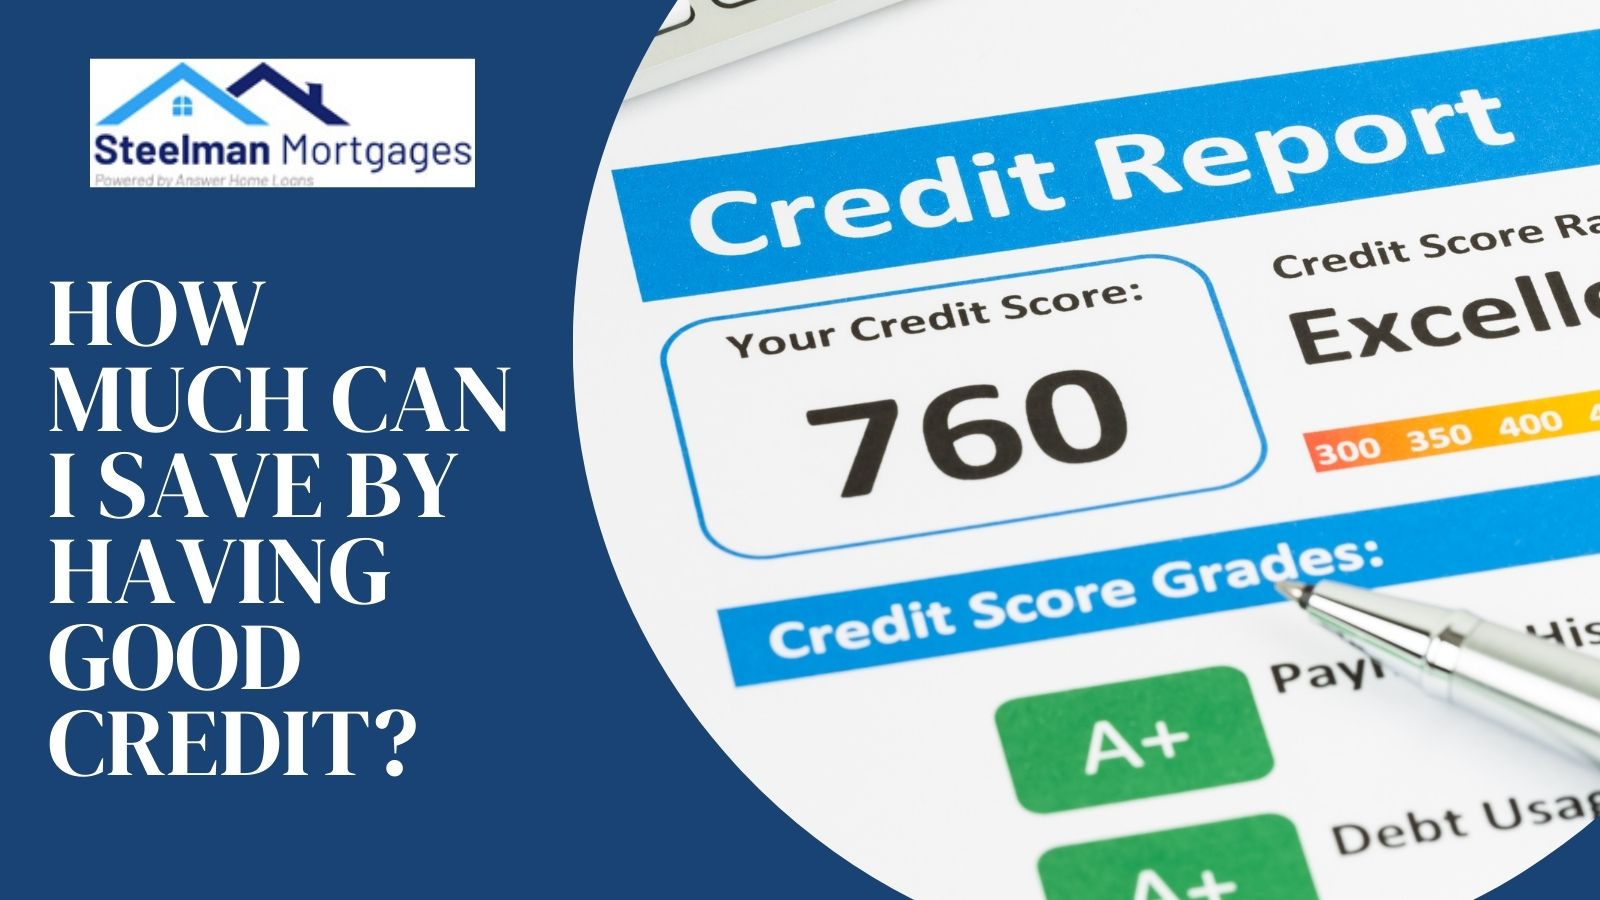 How Much Can I Save By Having Good Credit?